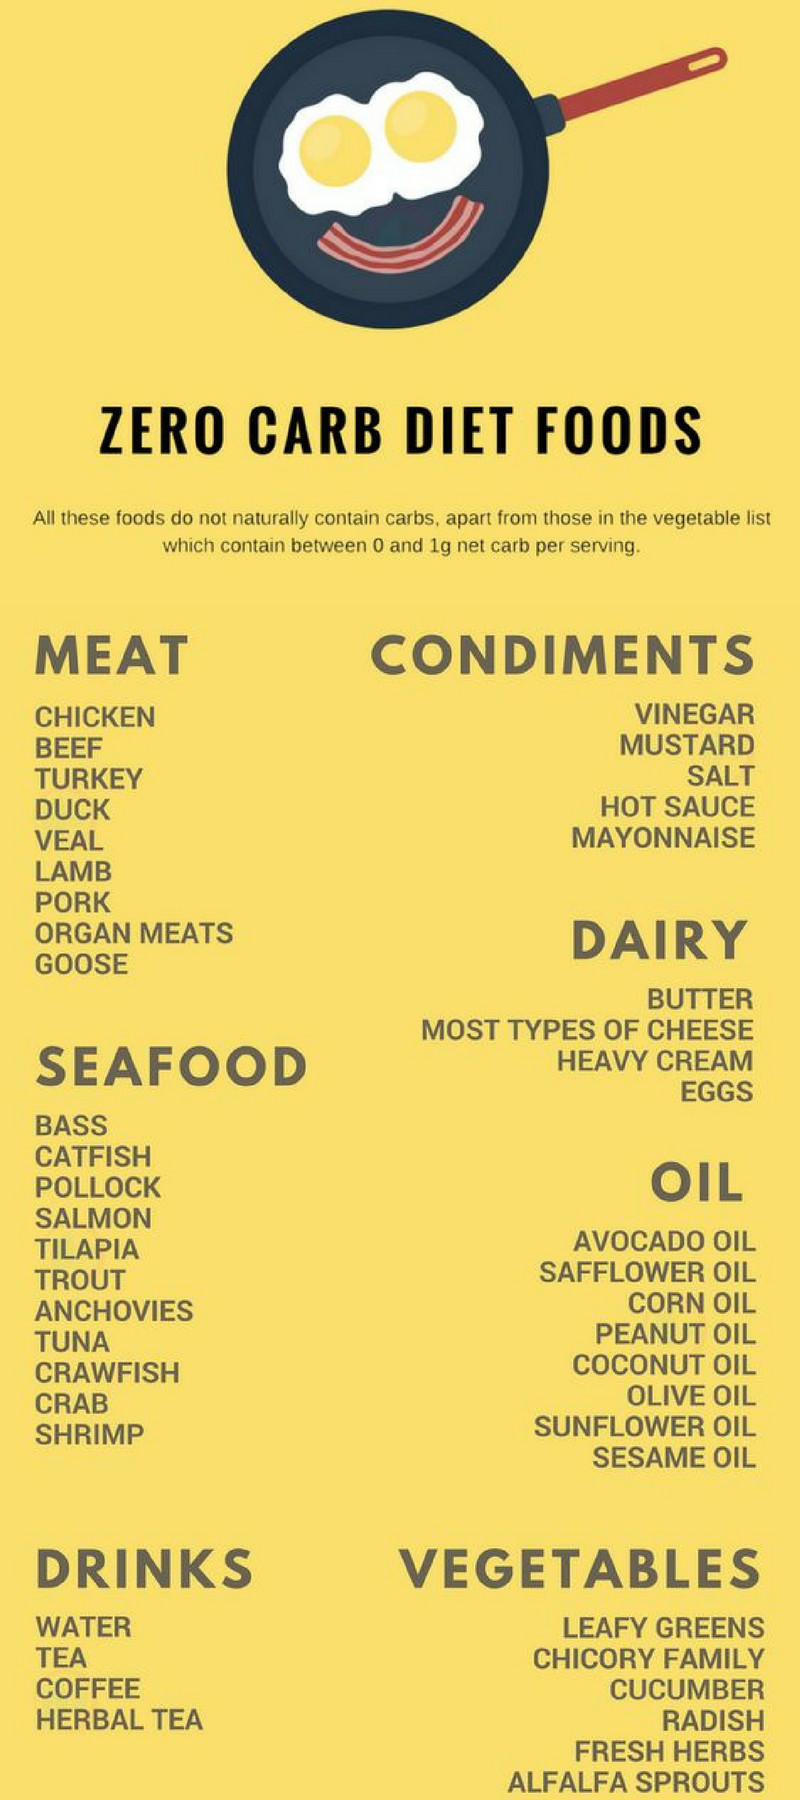 Keto Diet For Beginners Meal Plan With Grocery List Free
 The Ultimate Keto Diet Beginner s Guide & Grocery List